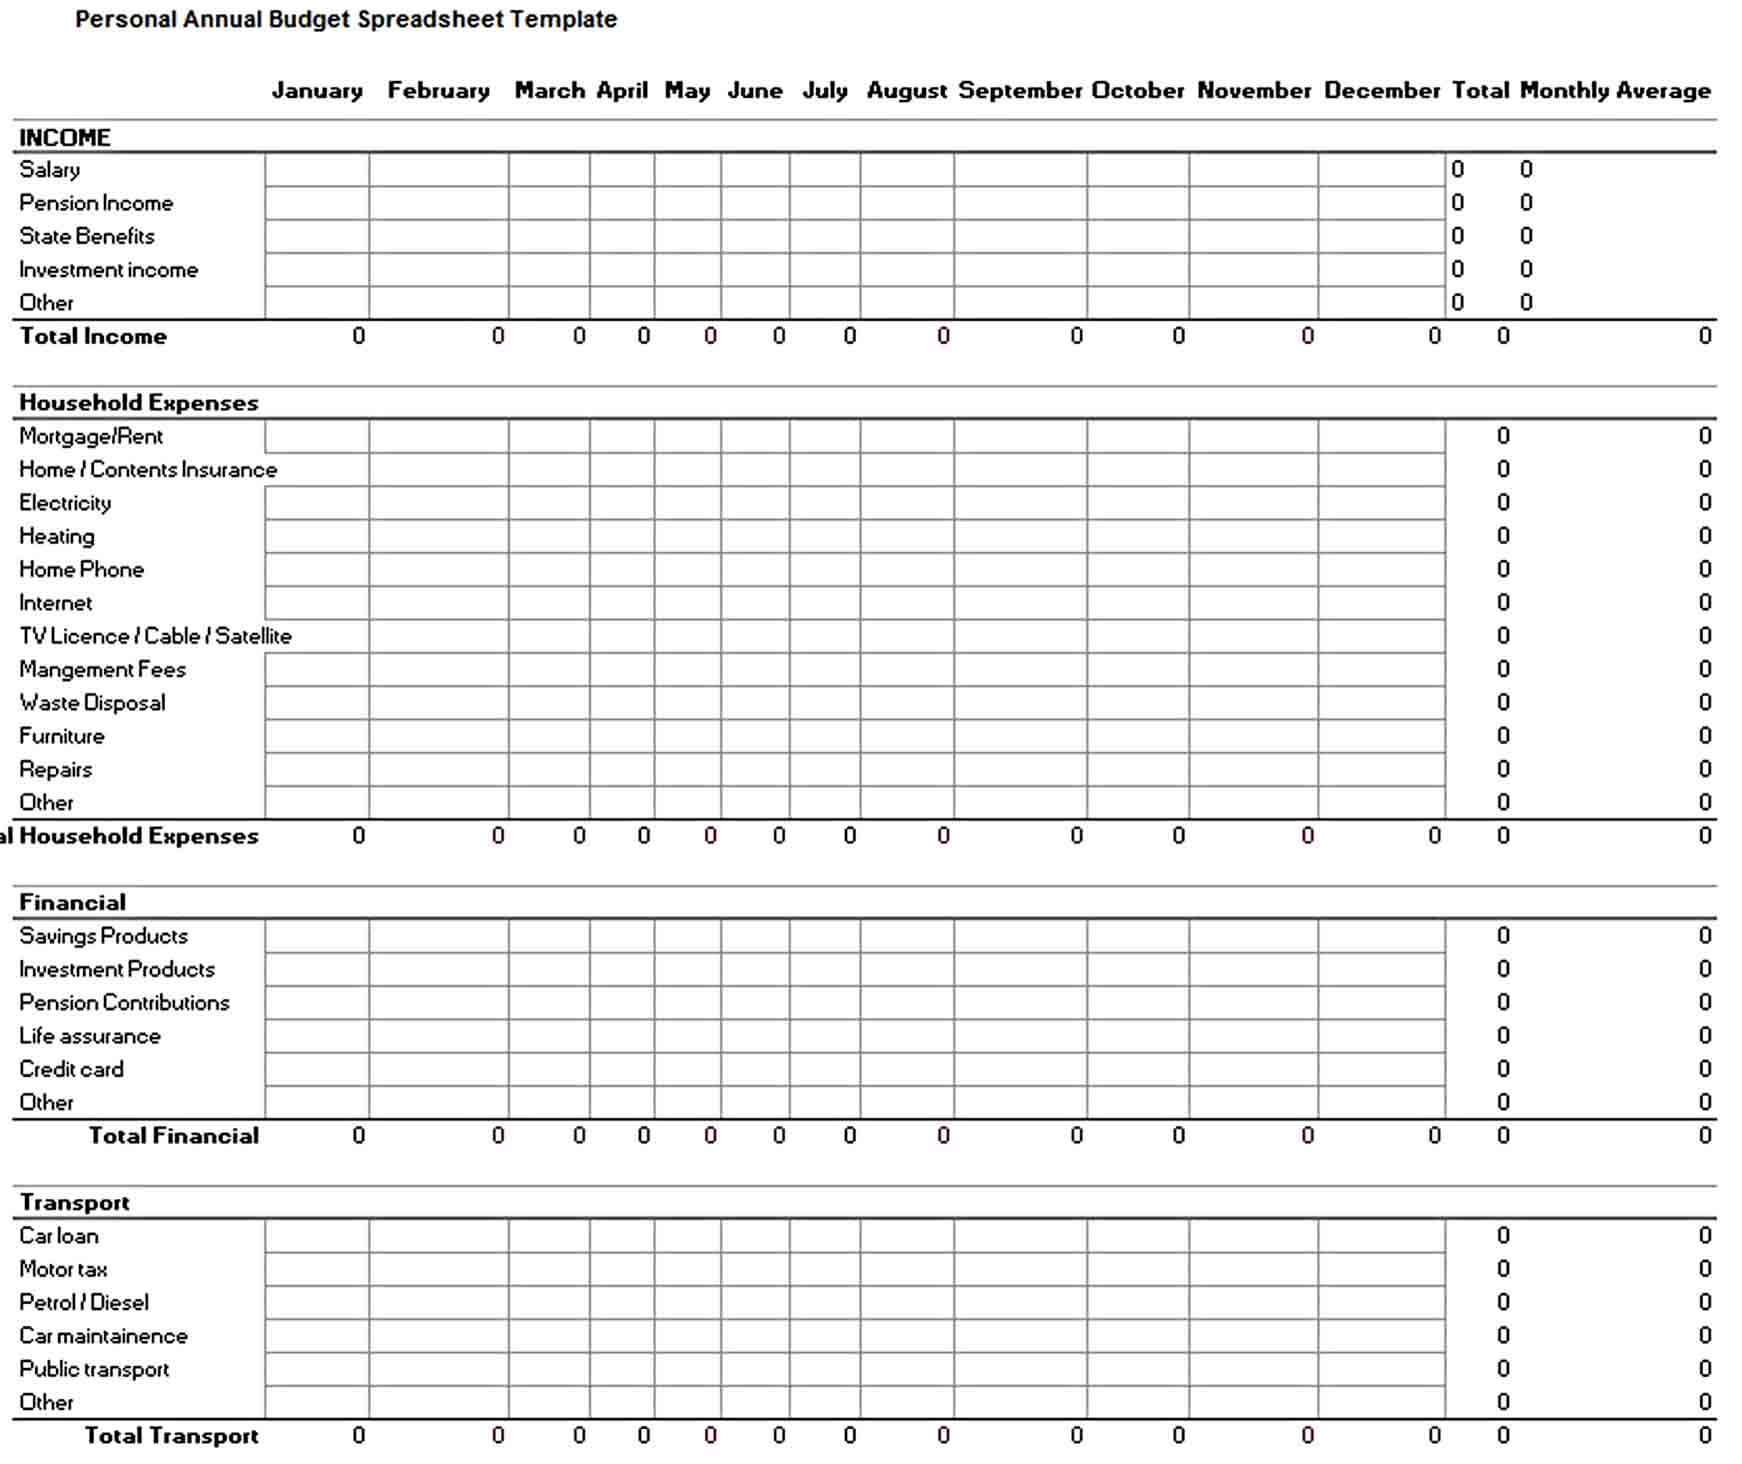 personal annual budget spreadsheet template